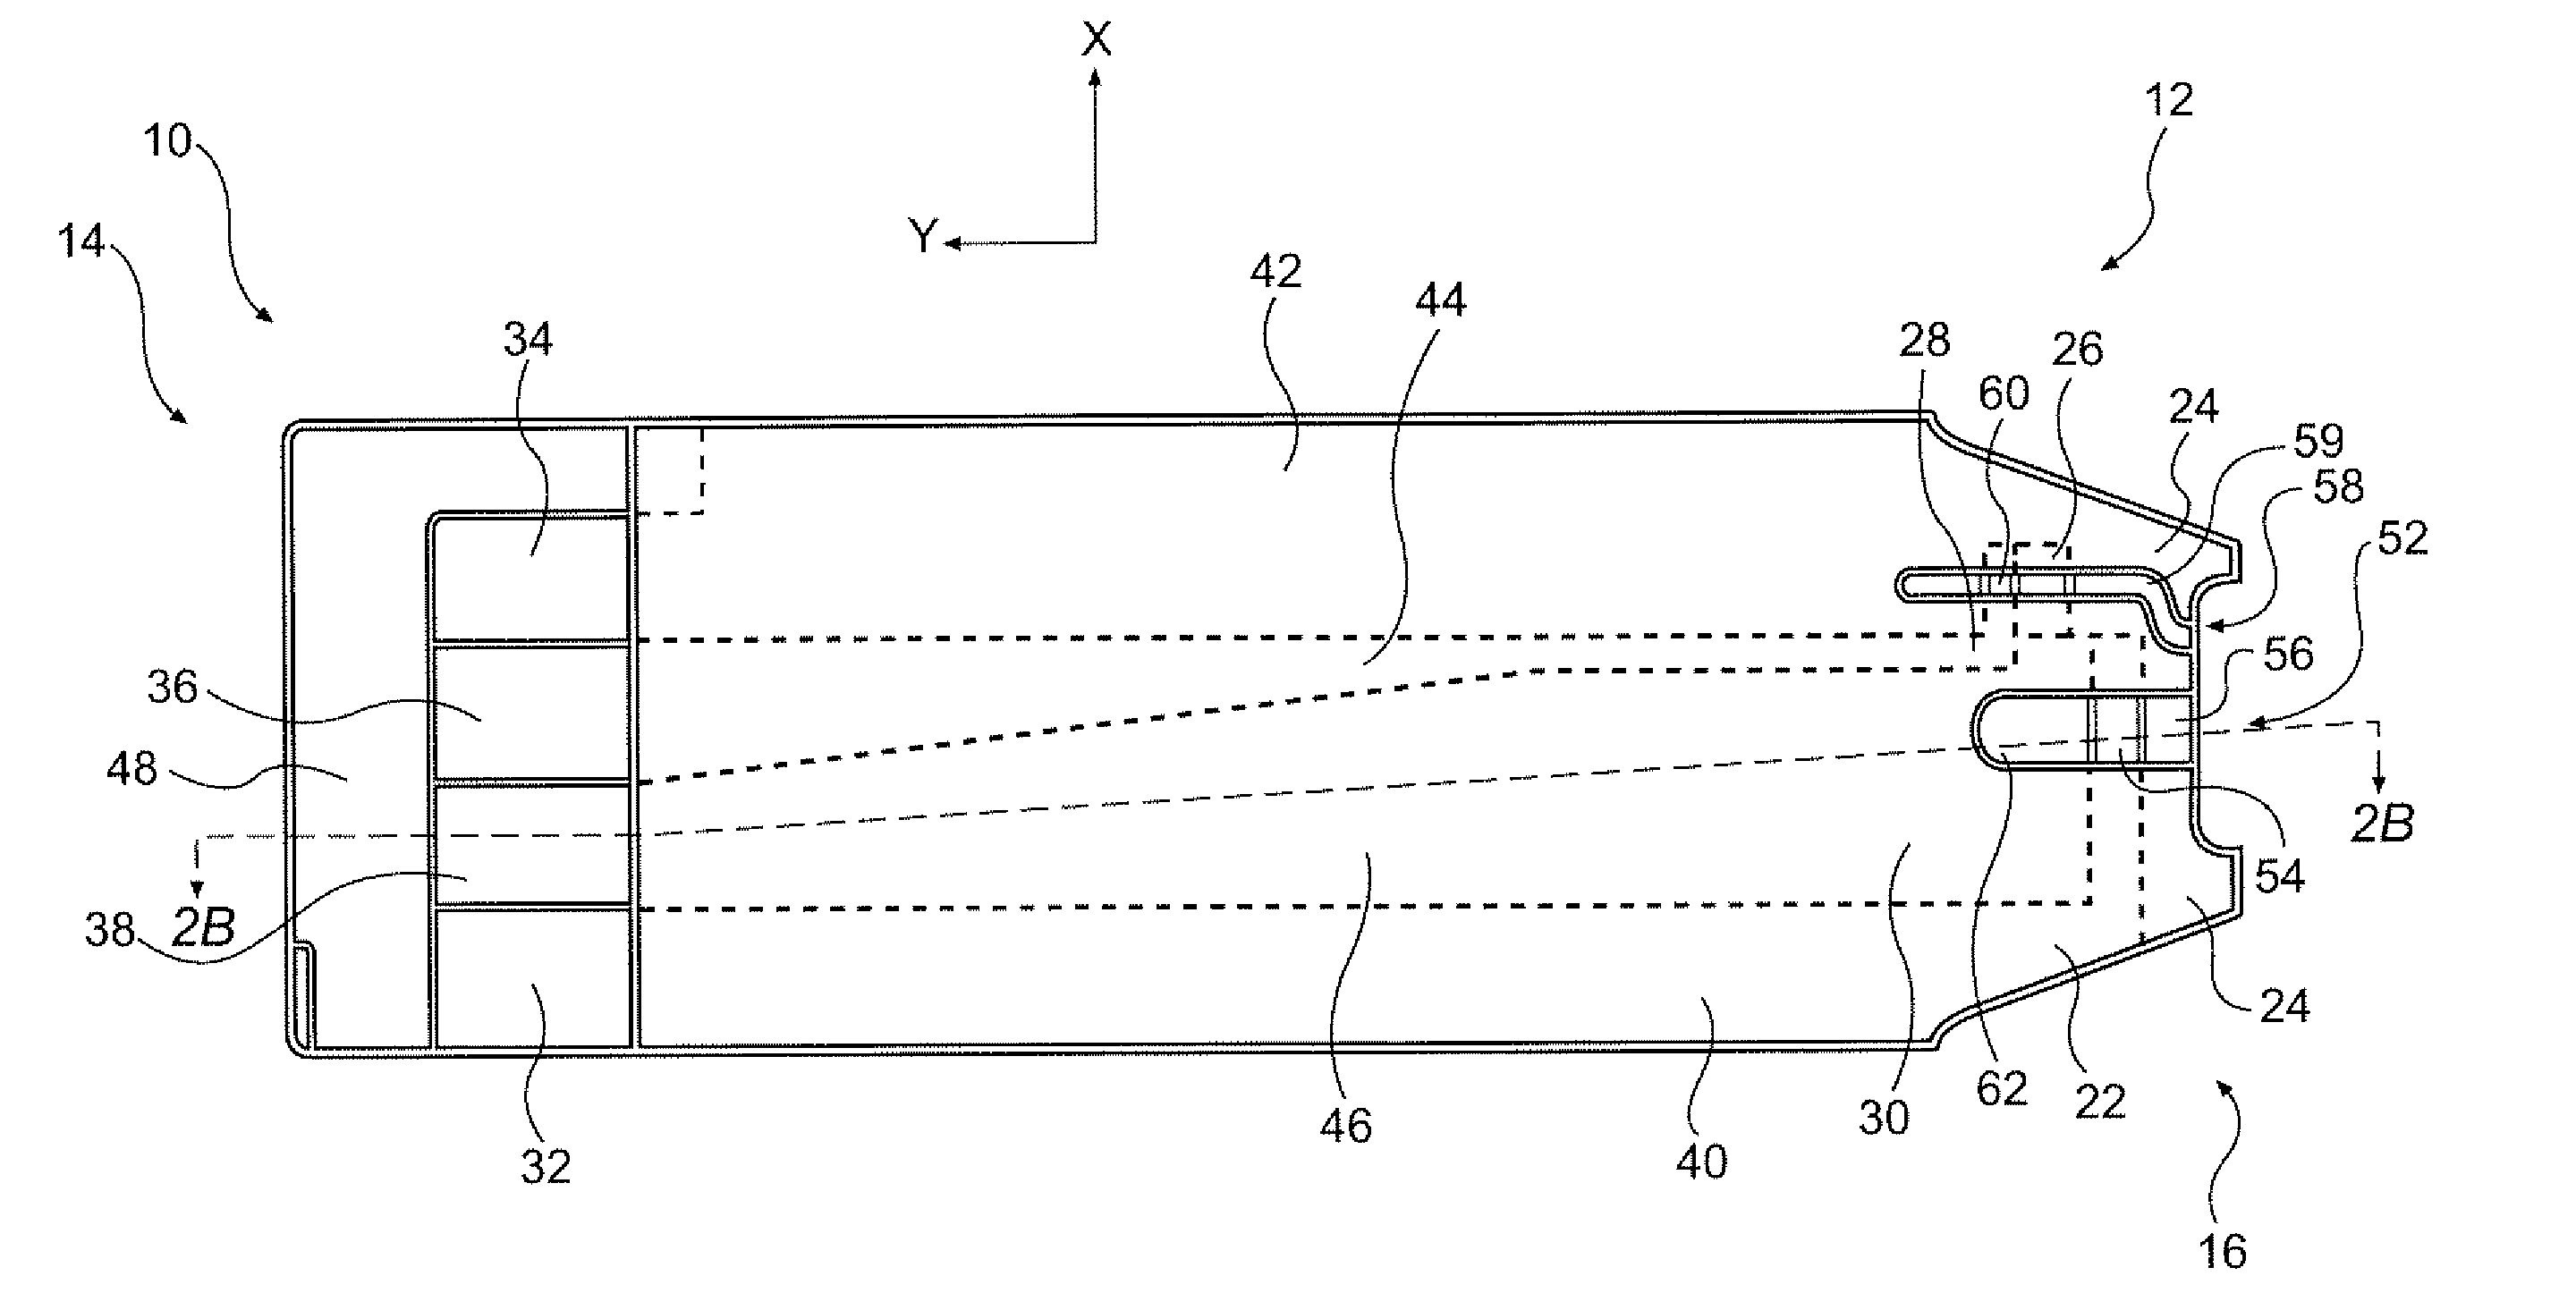 System and Methods for Determining an Analyte Concentration Incorporating a Hematocrit Correction